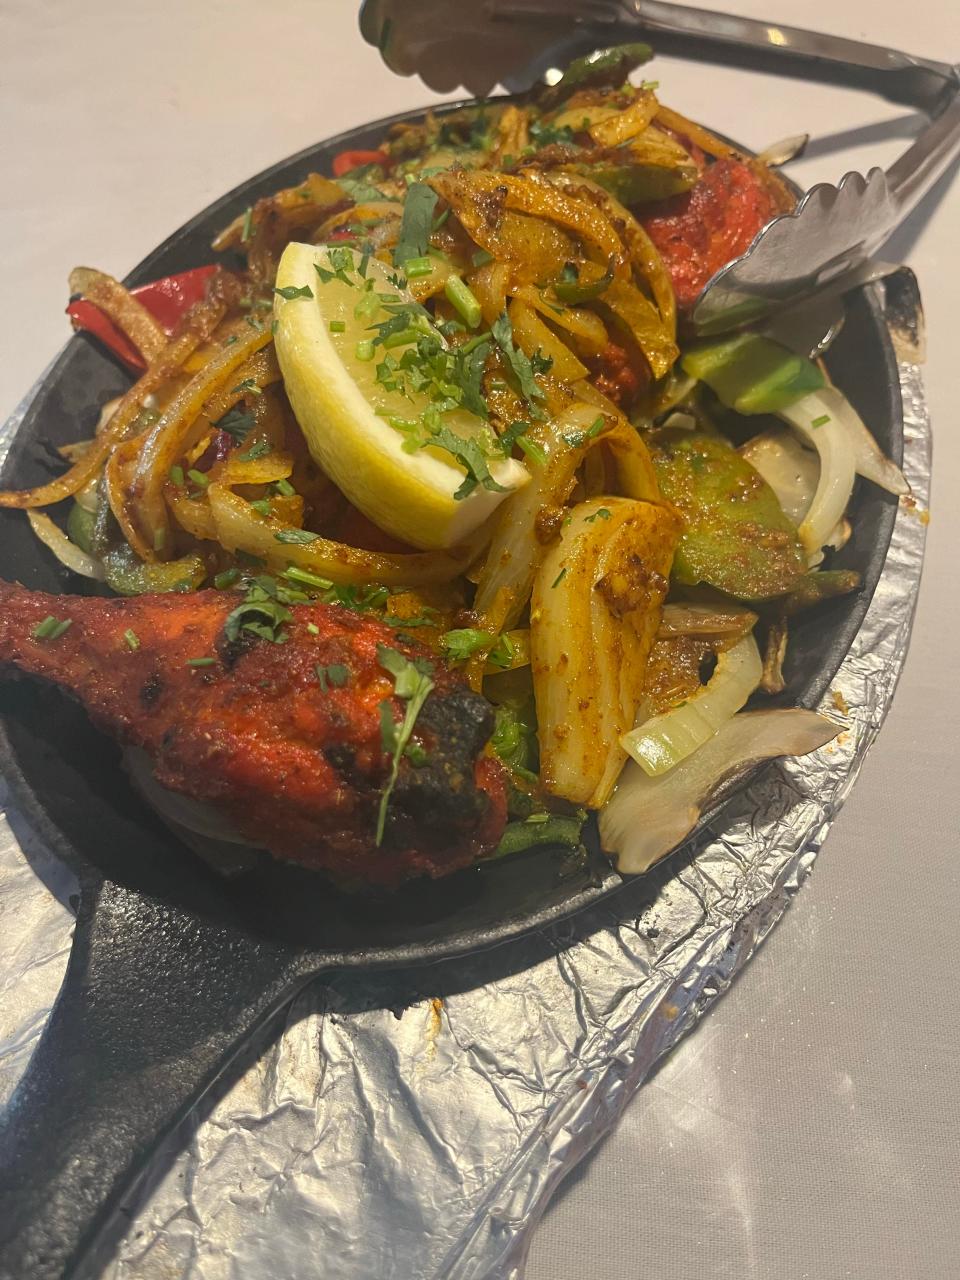 A half order of Tandoori chicken comes sizzling on a hot skillet, marinated with yogurt, ginger garlic and Indian spices for 12 hours at The Spice Delight.